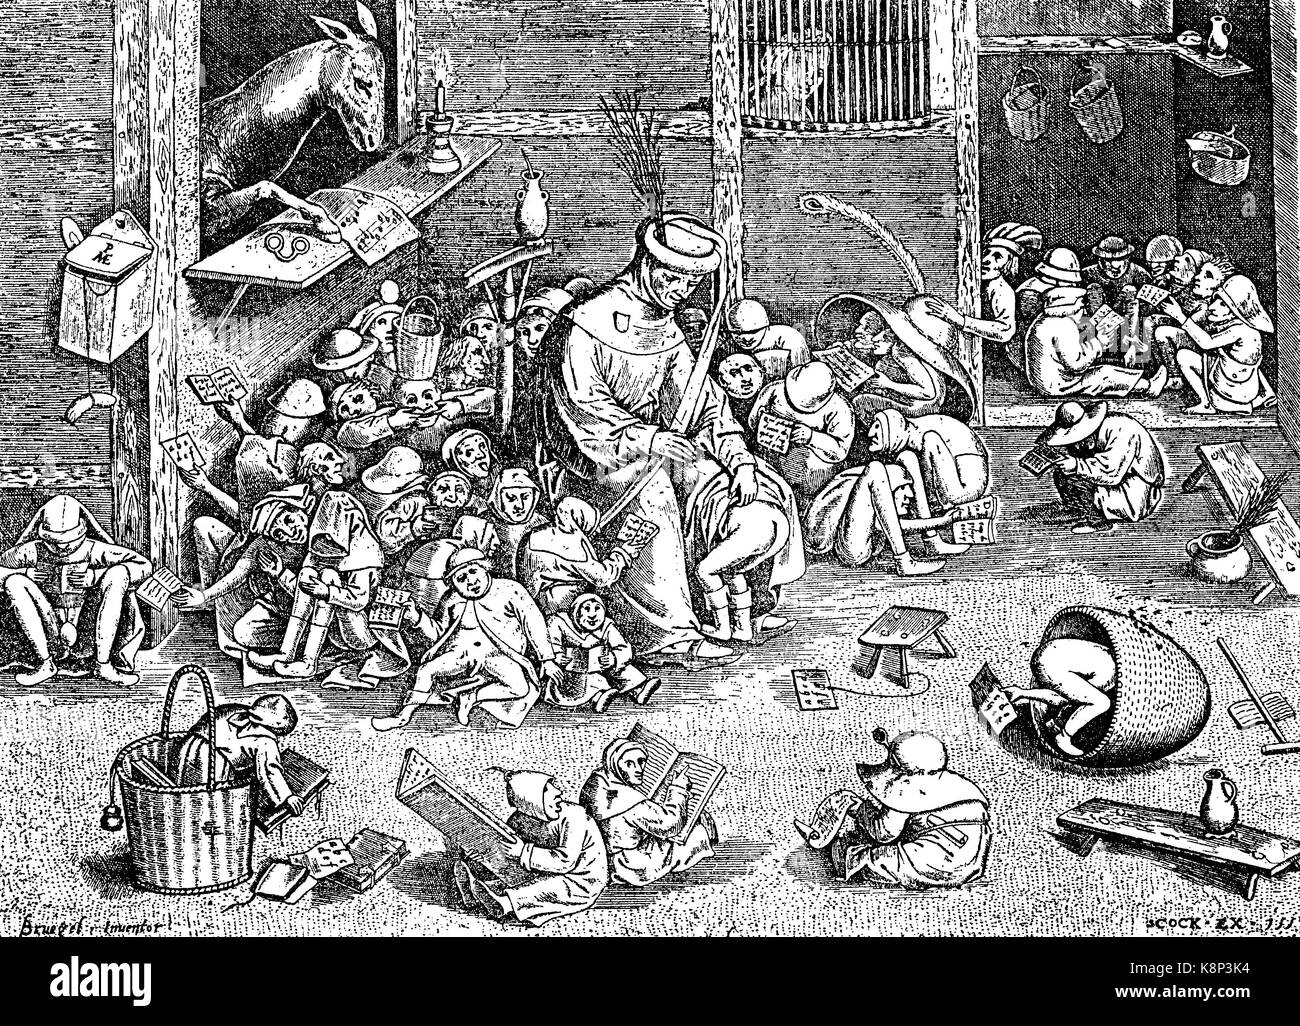 Satirical representation of a school scene, Satirische Darstellung einer Schulszene, 1557, digital improved reproduction of a woodcut, published in the 19th century Stock Photo